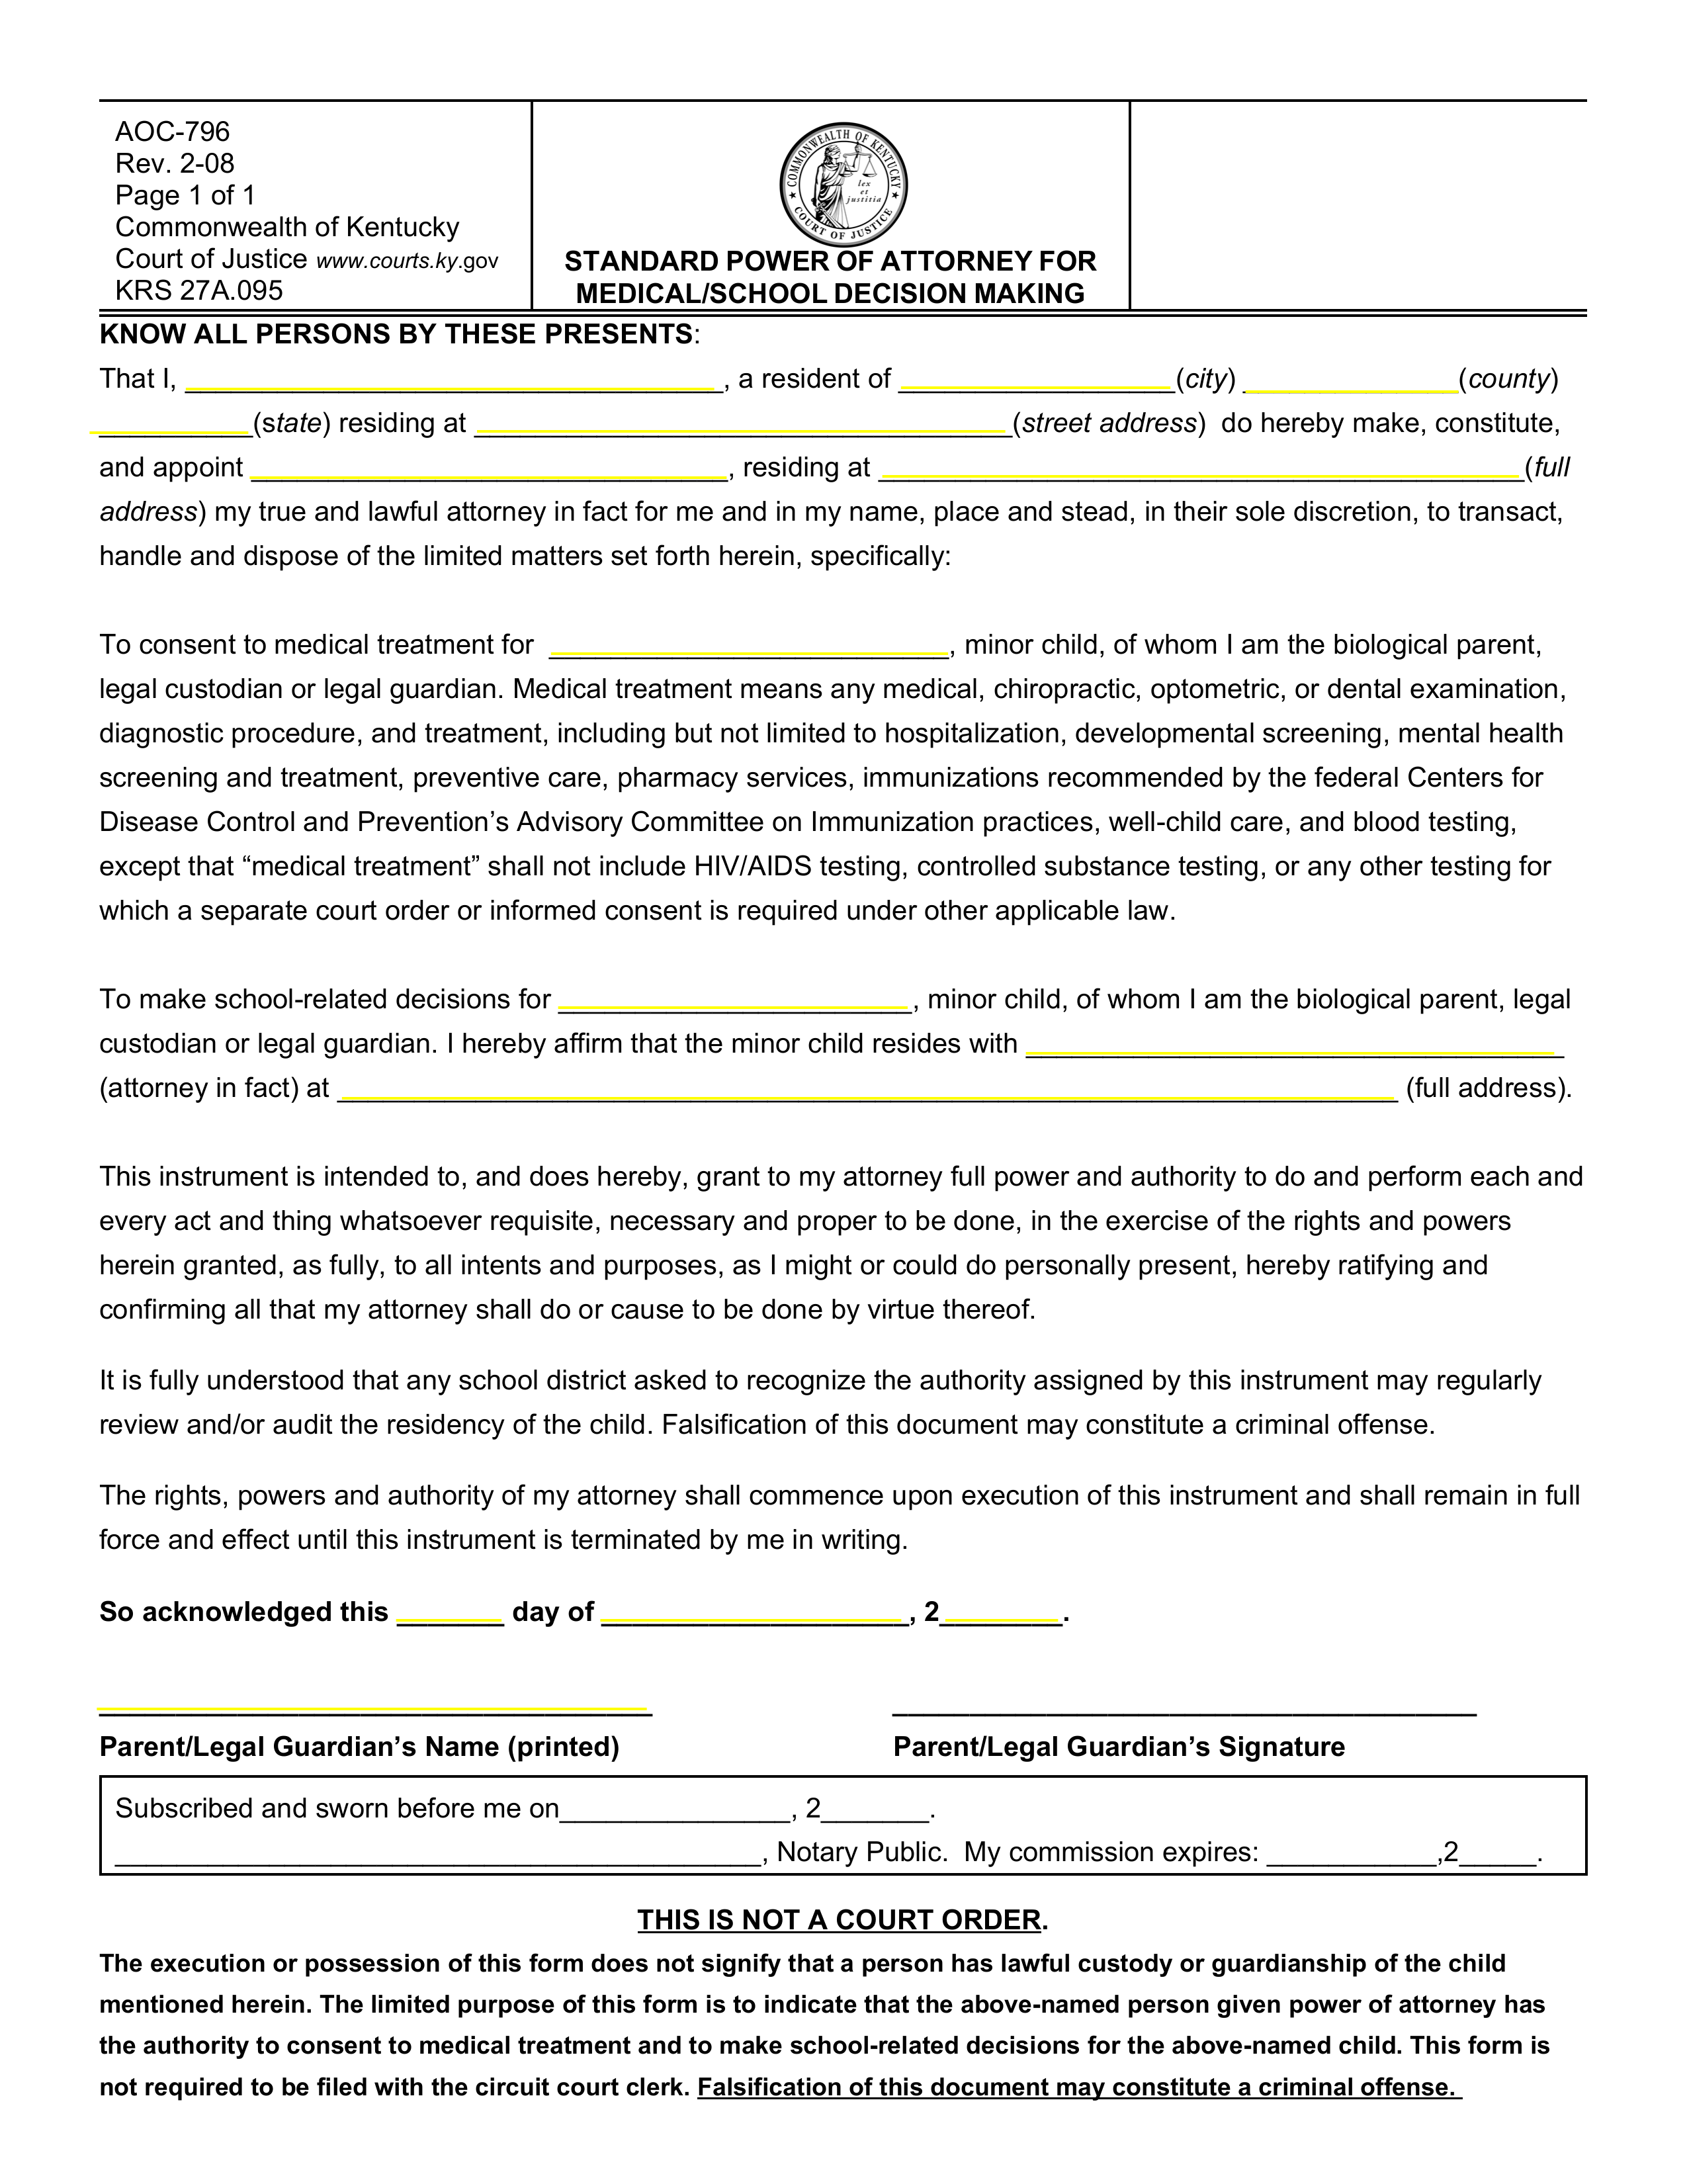 Free Kentucky Power Of Attorney For Minor Child Form AOC 796 PDF 